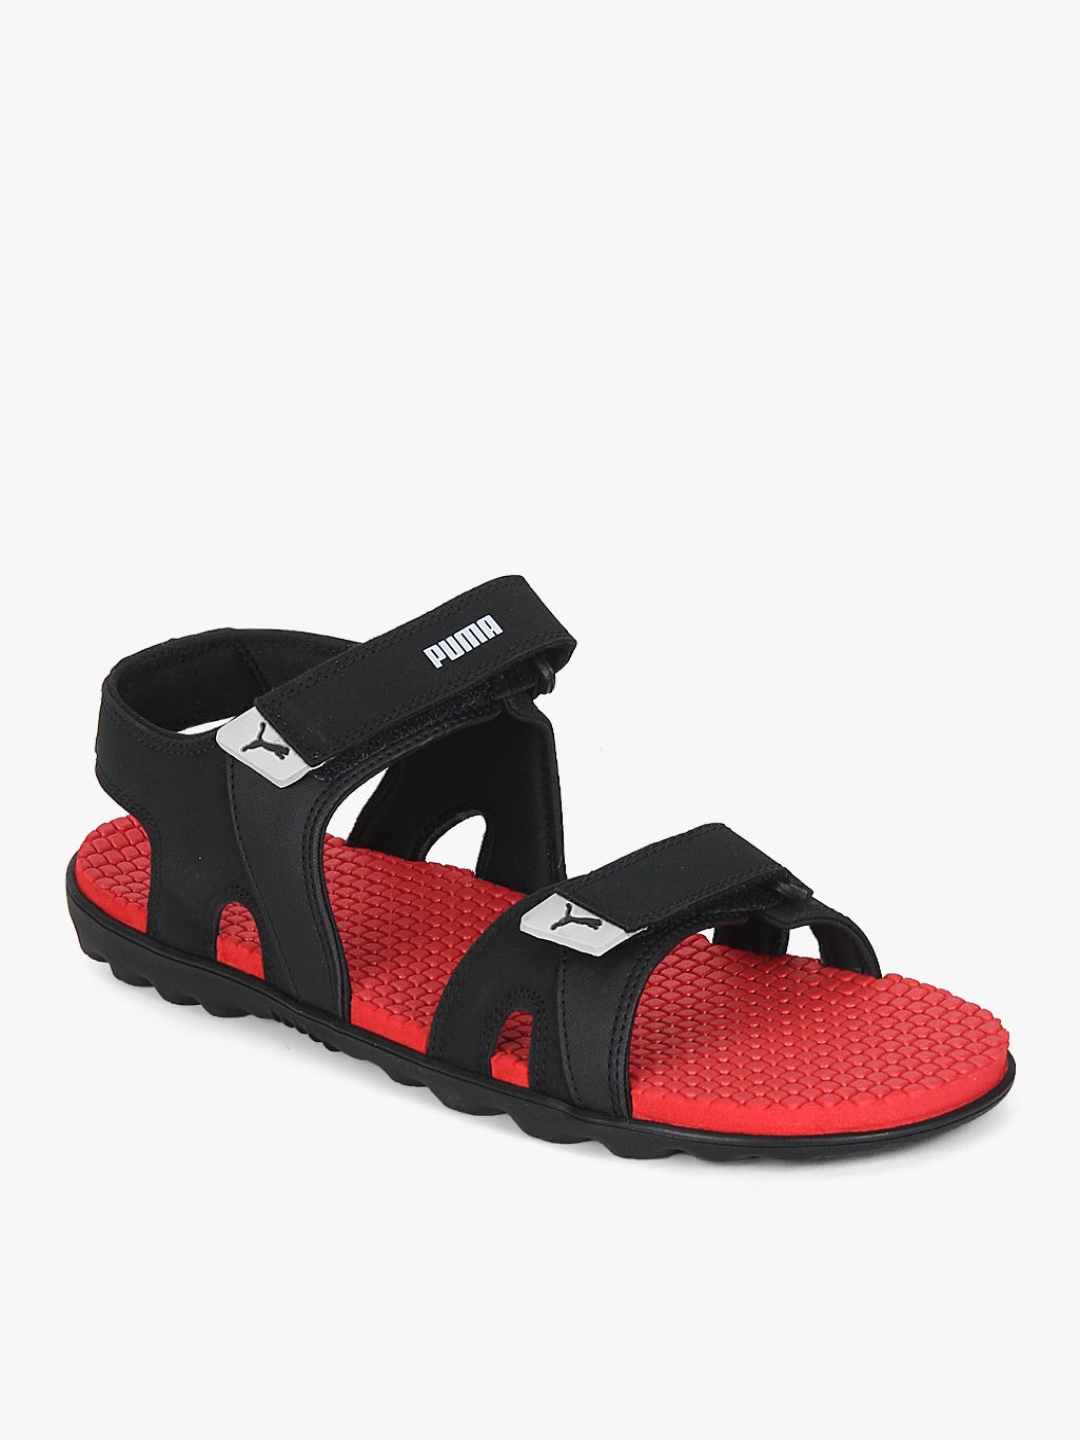 myntra sandals and floaters